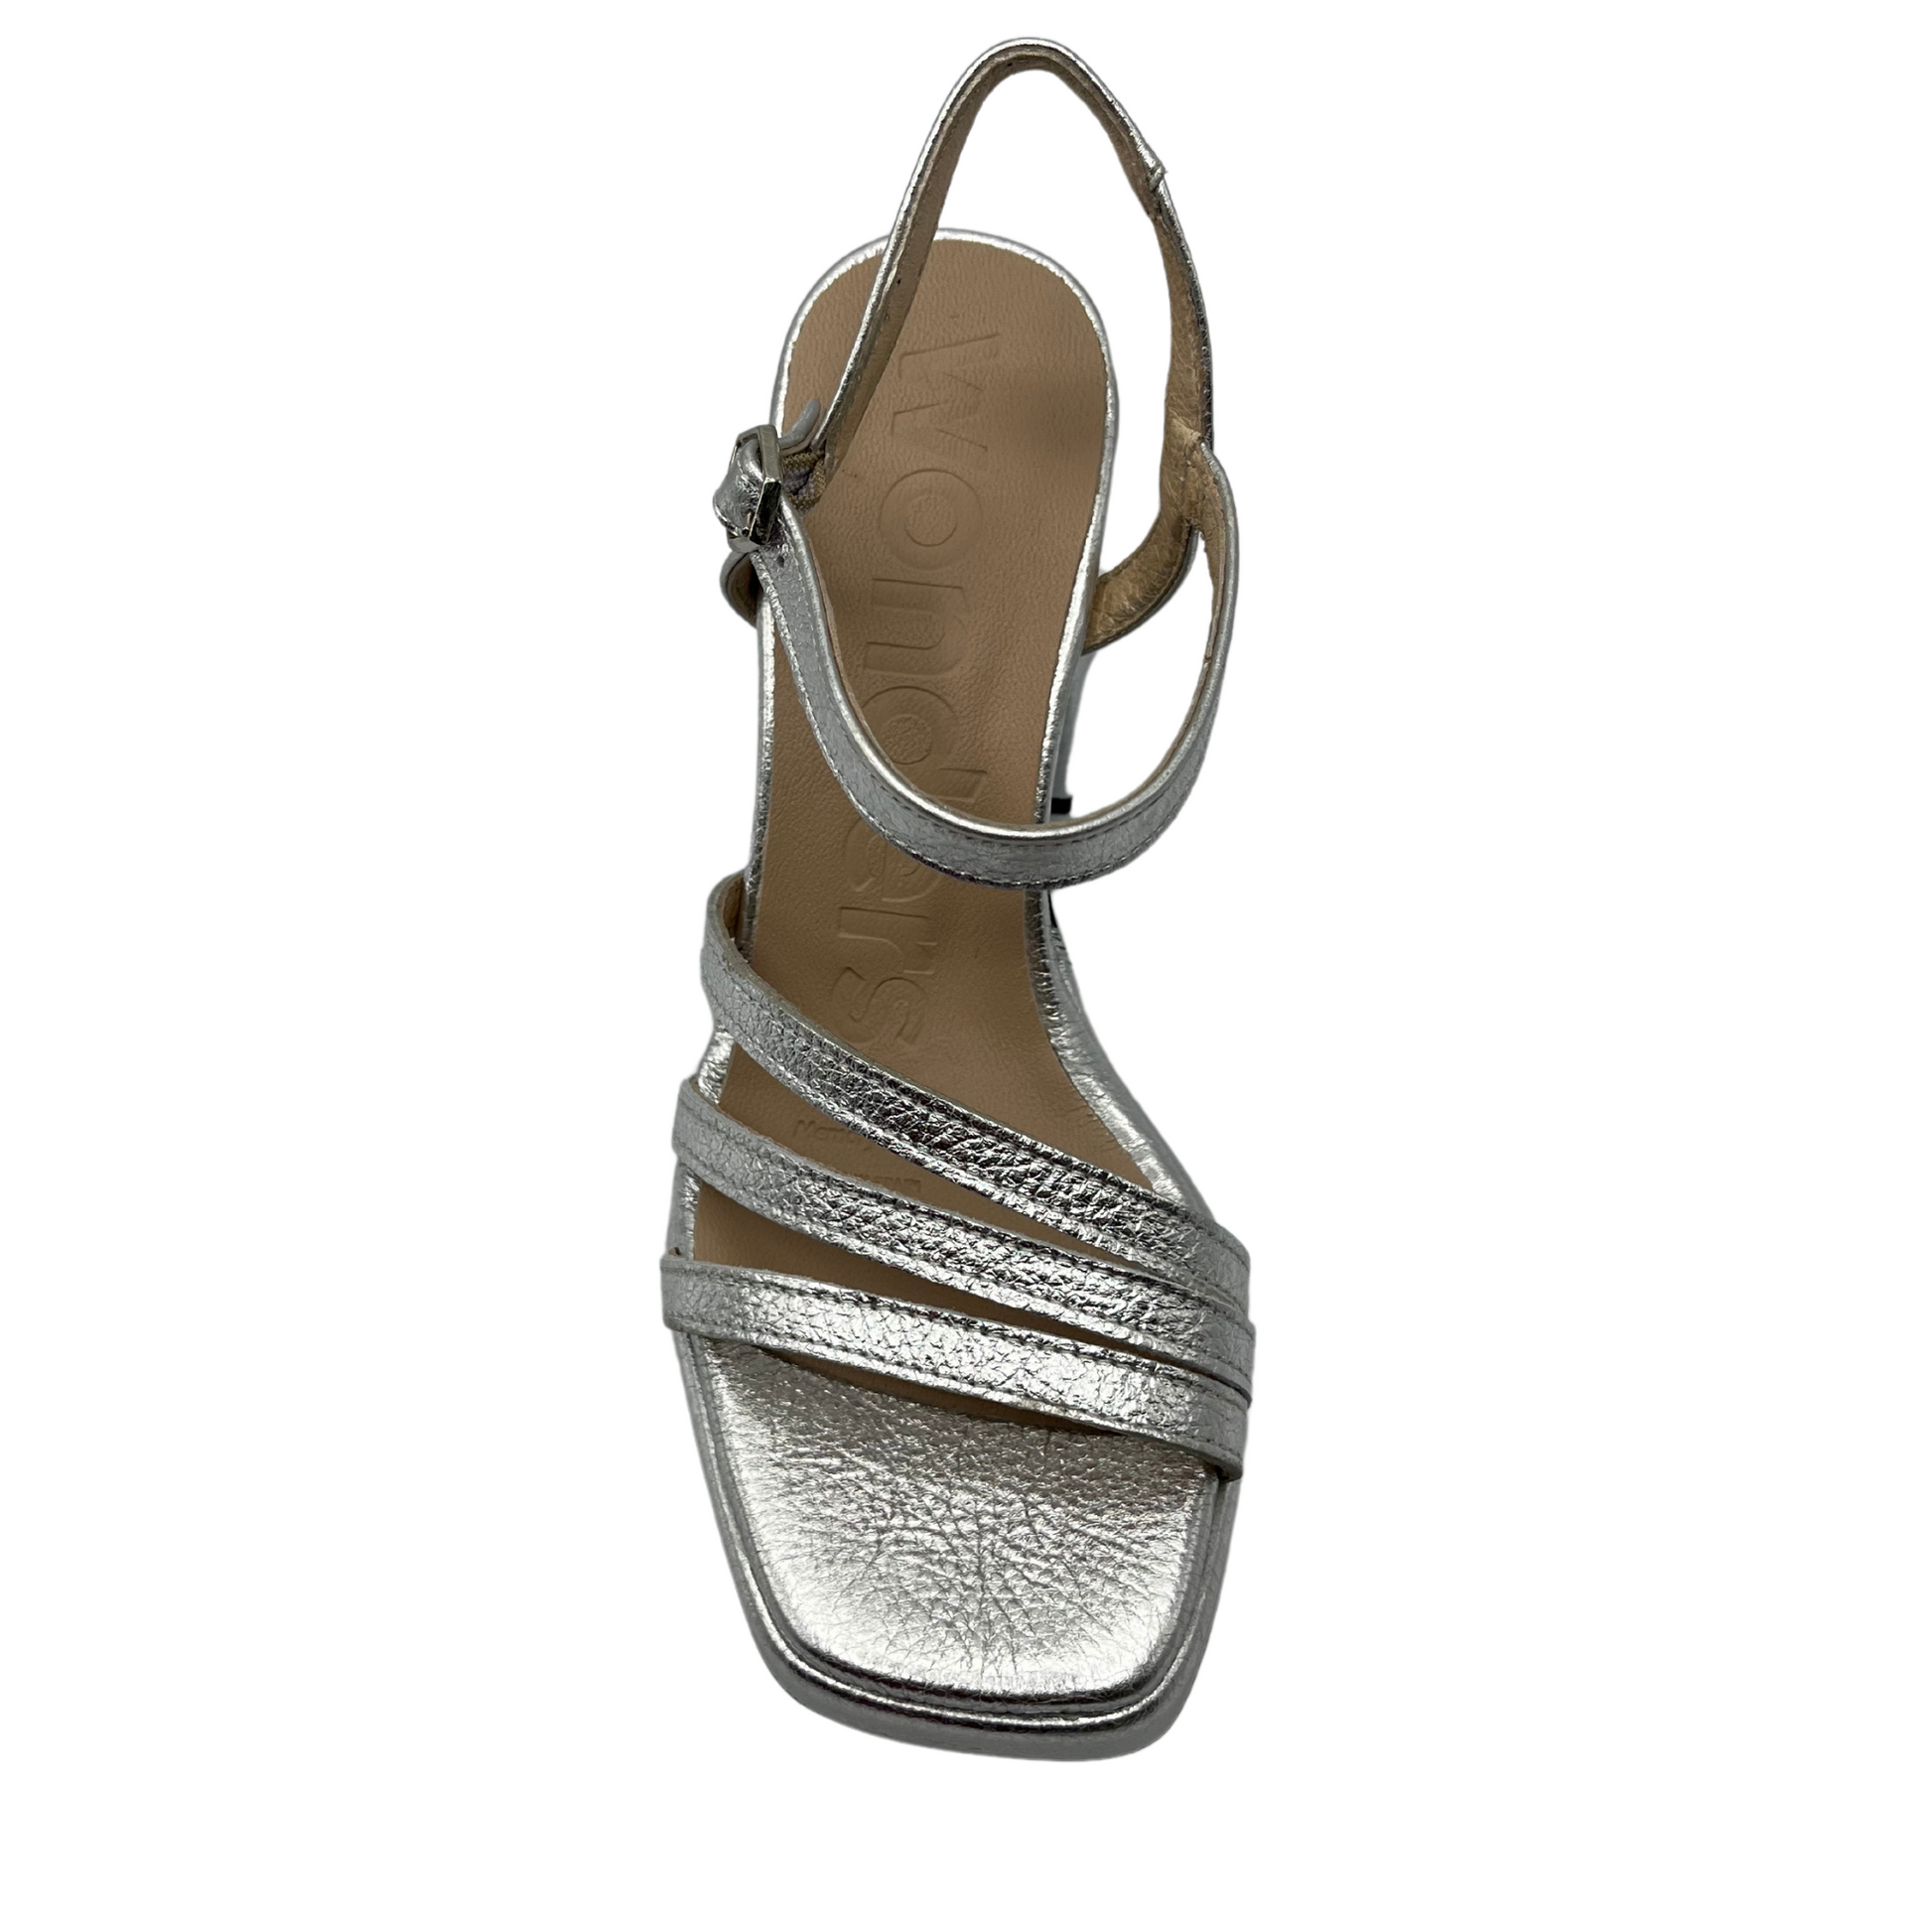 Top view of metallic sandal with thin ankle strap and square toe